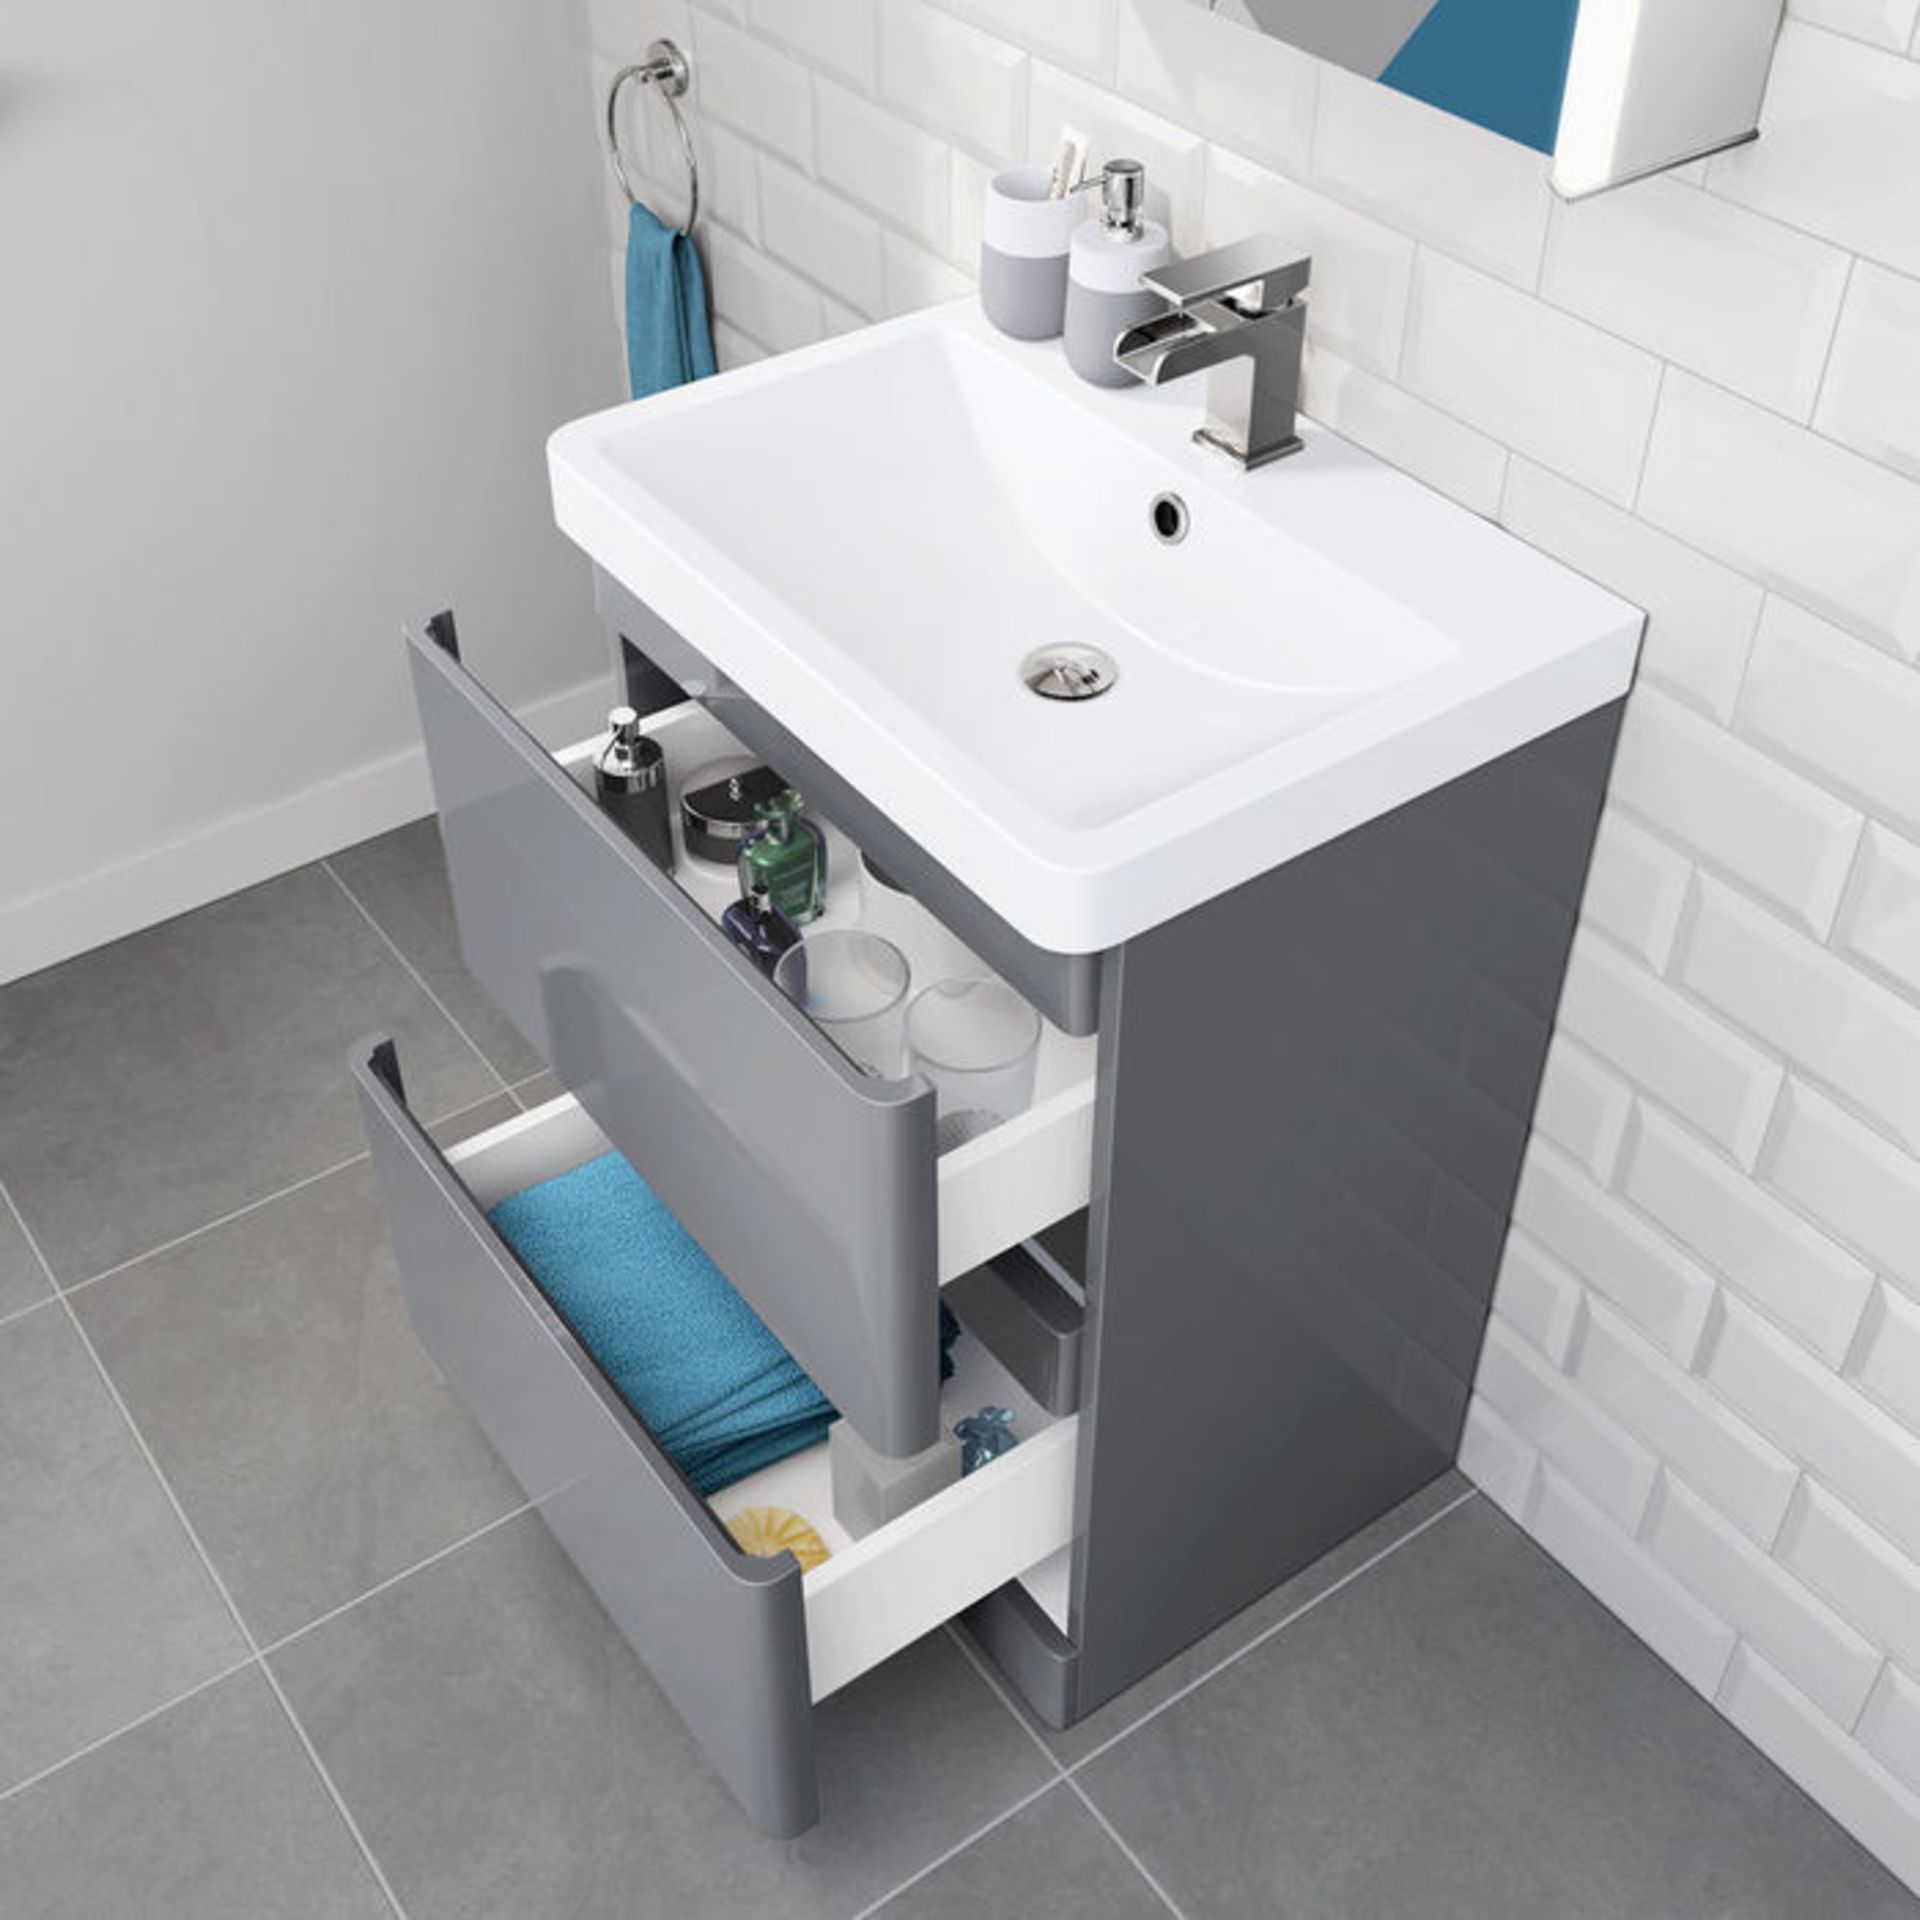 (KL301) 600mm Denver Gloss Grey Drawer Unit - Floor Standing. . Does NOT include basin. We love this - Image 2 of 5